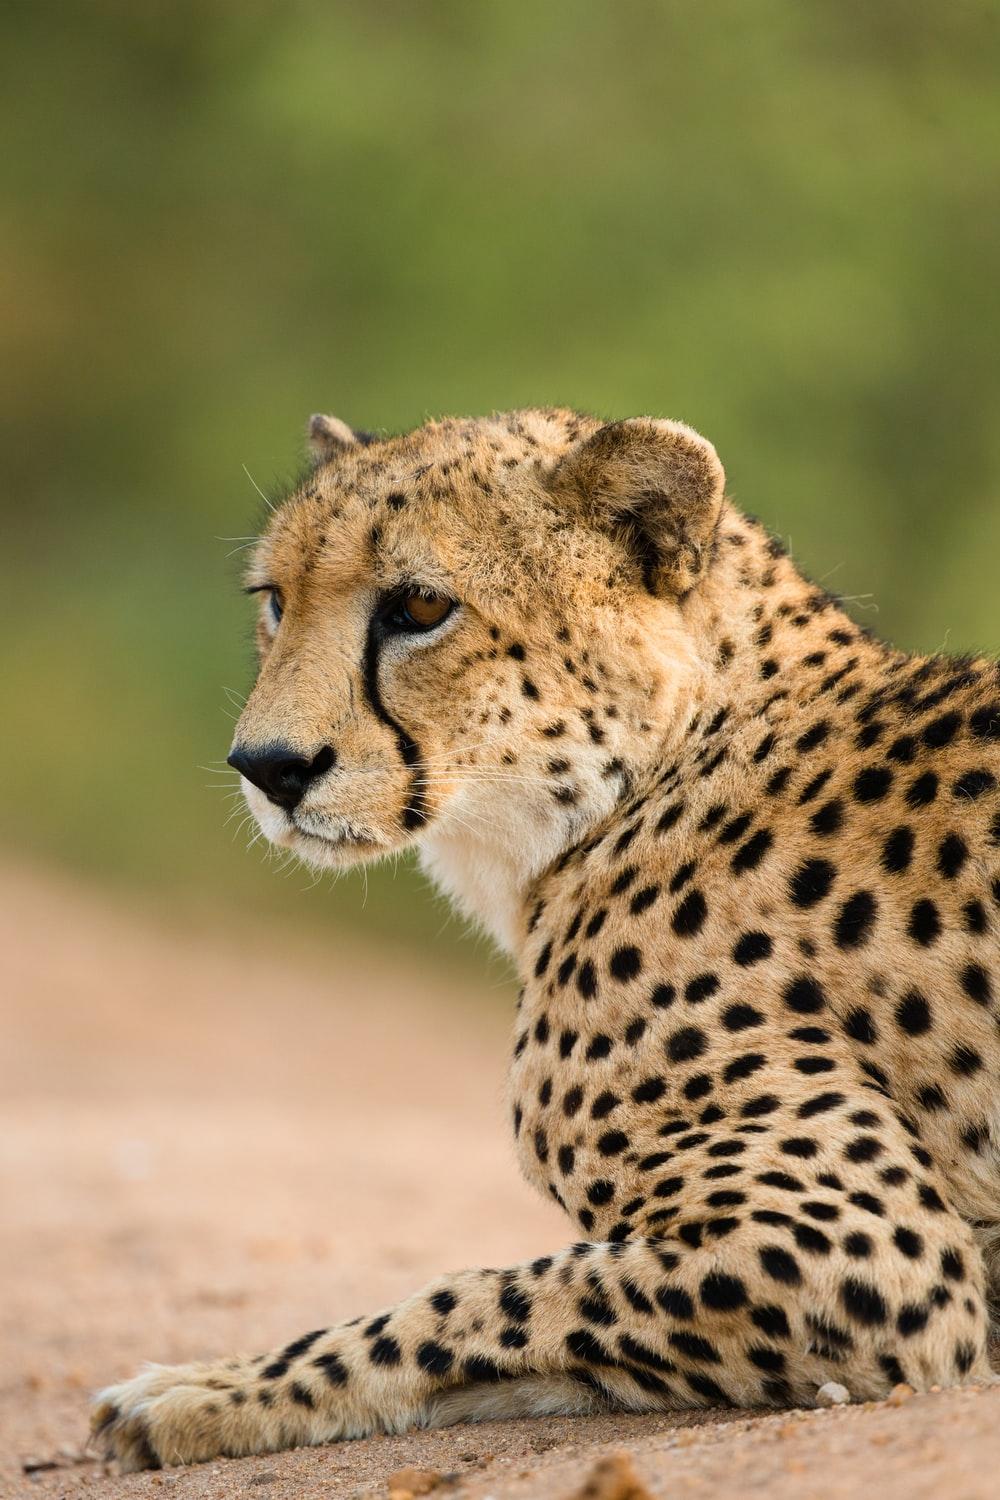 Cheetah Image: Download HD Picture & Photo